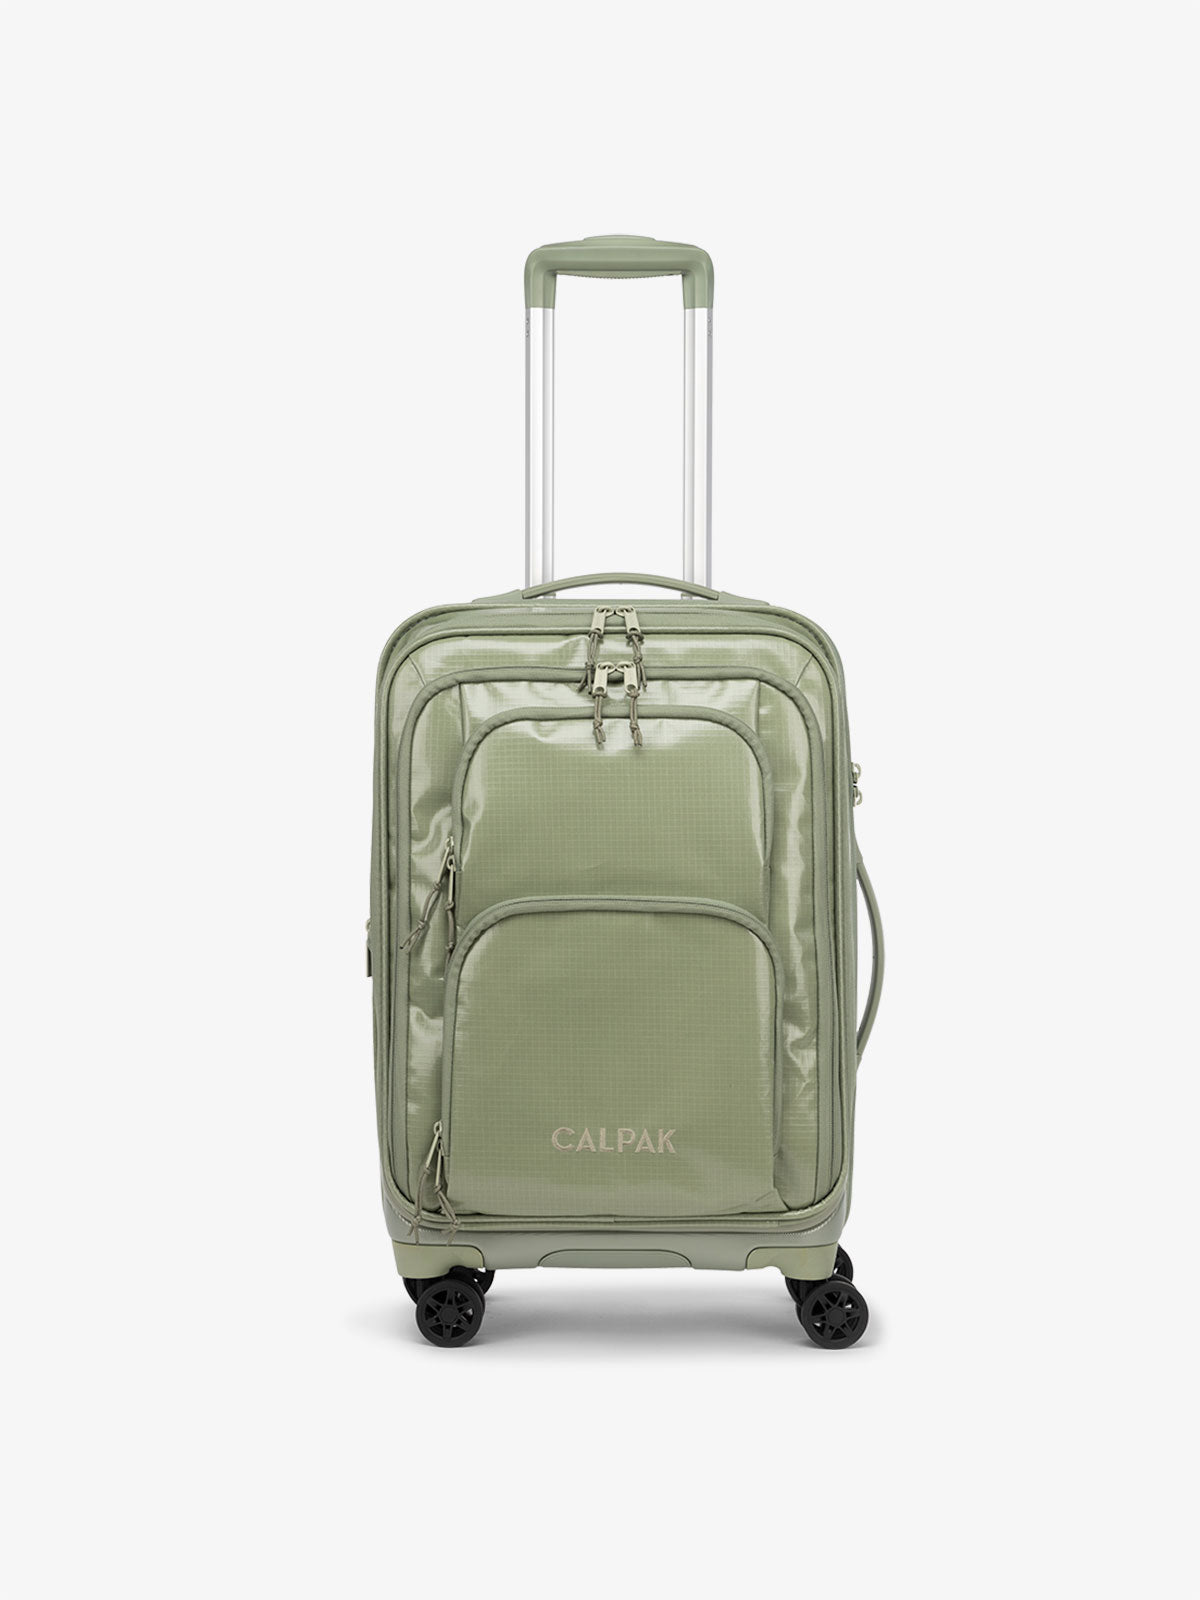 CALPAK Terra Carry-On Luggage front soft shell view with 360 spinner wheels in juniper